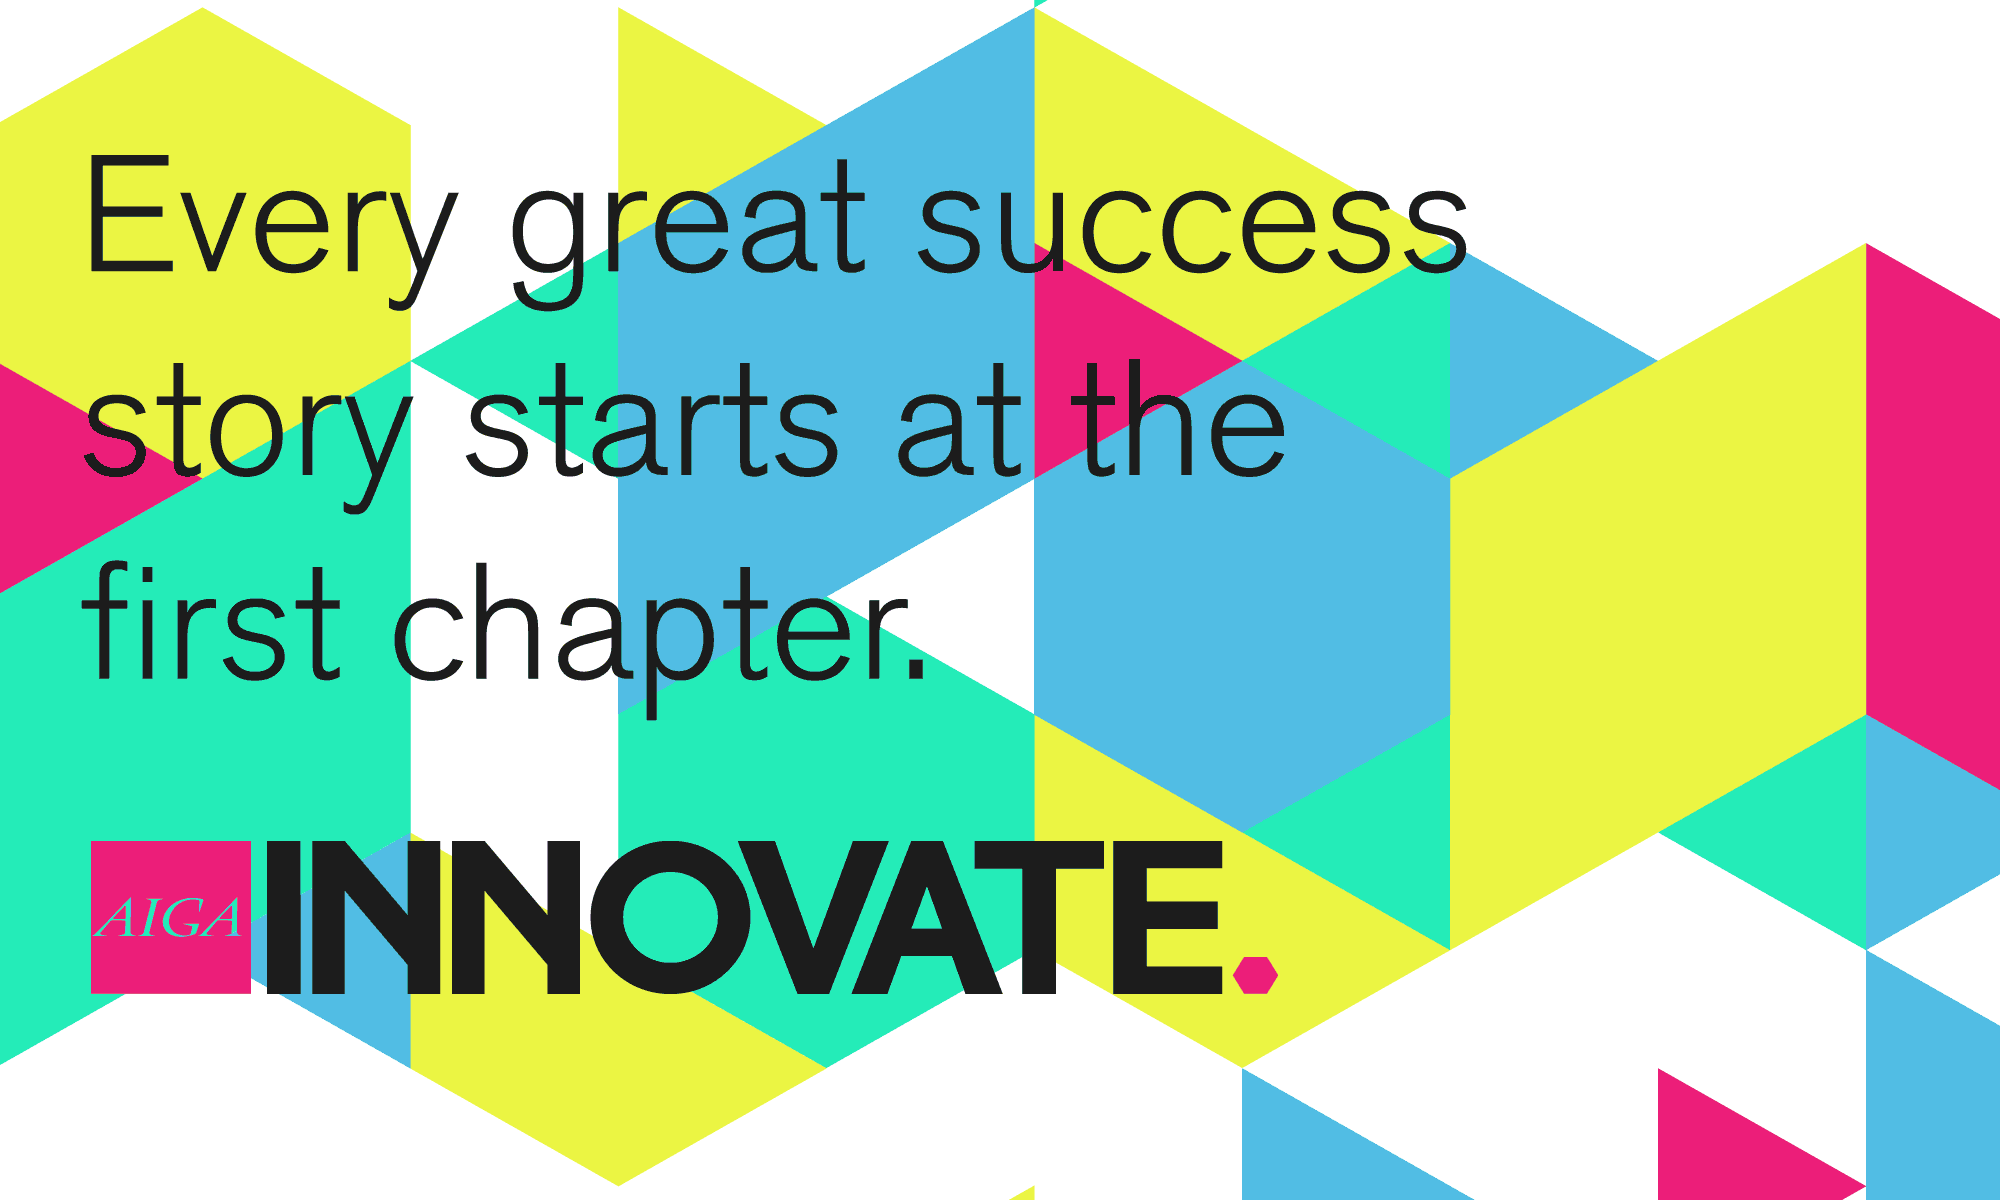 colorful geometric AIGA Innovate graphic with text "Every great success story starts at the first chapter."